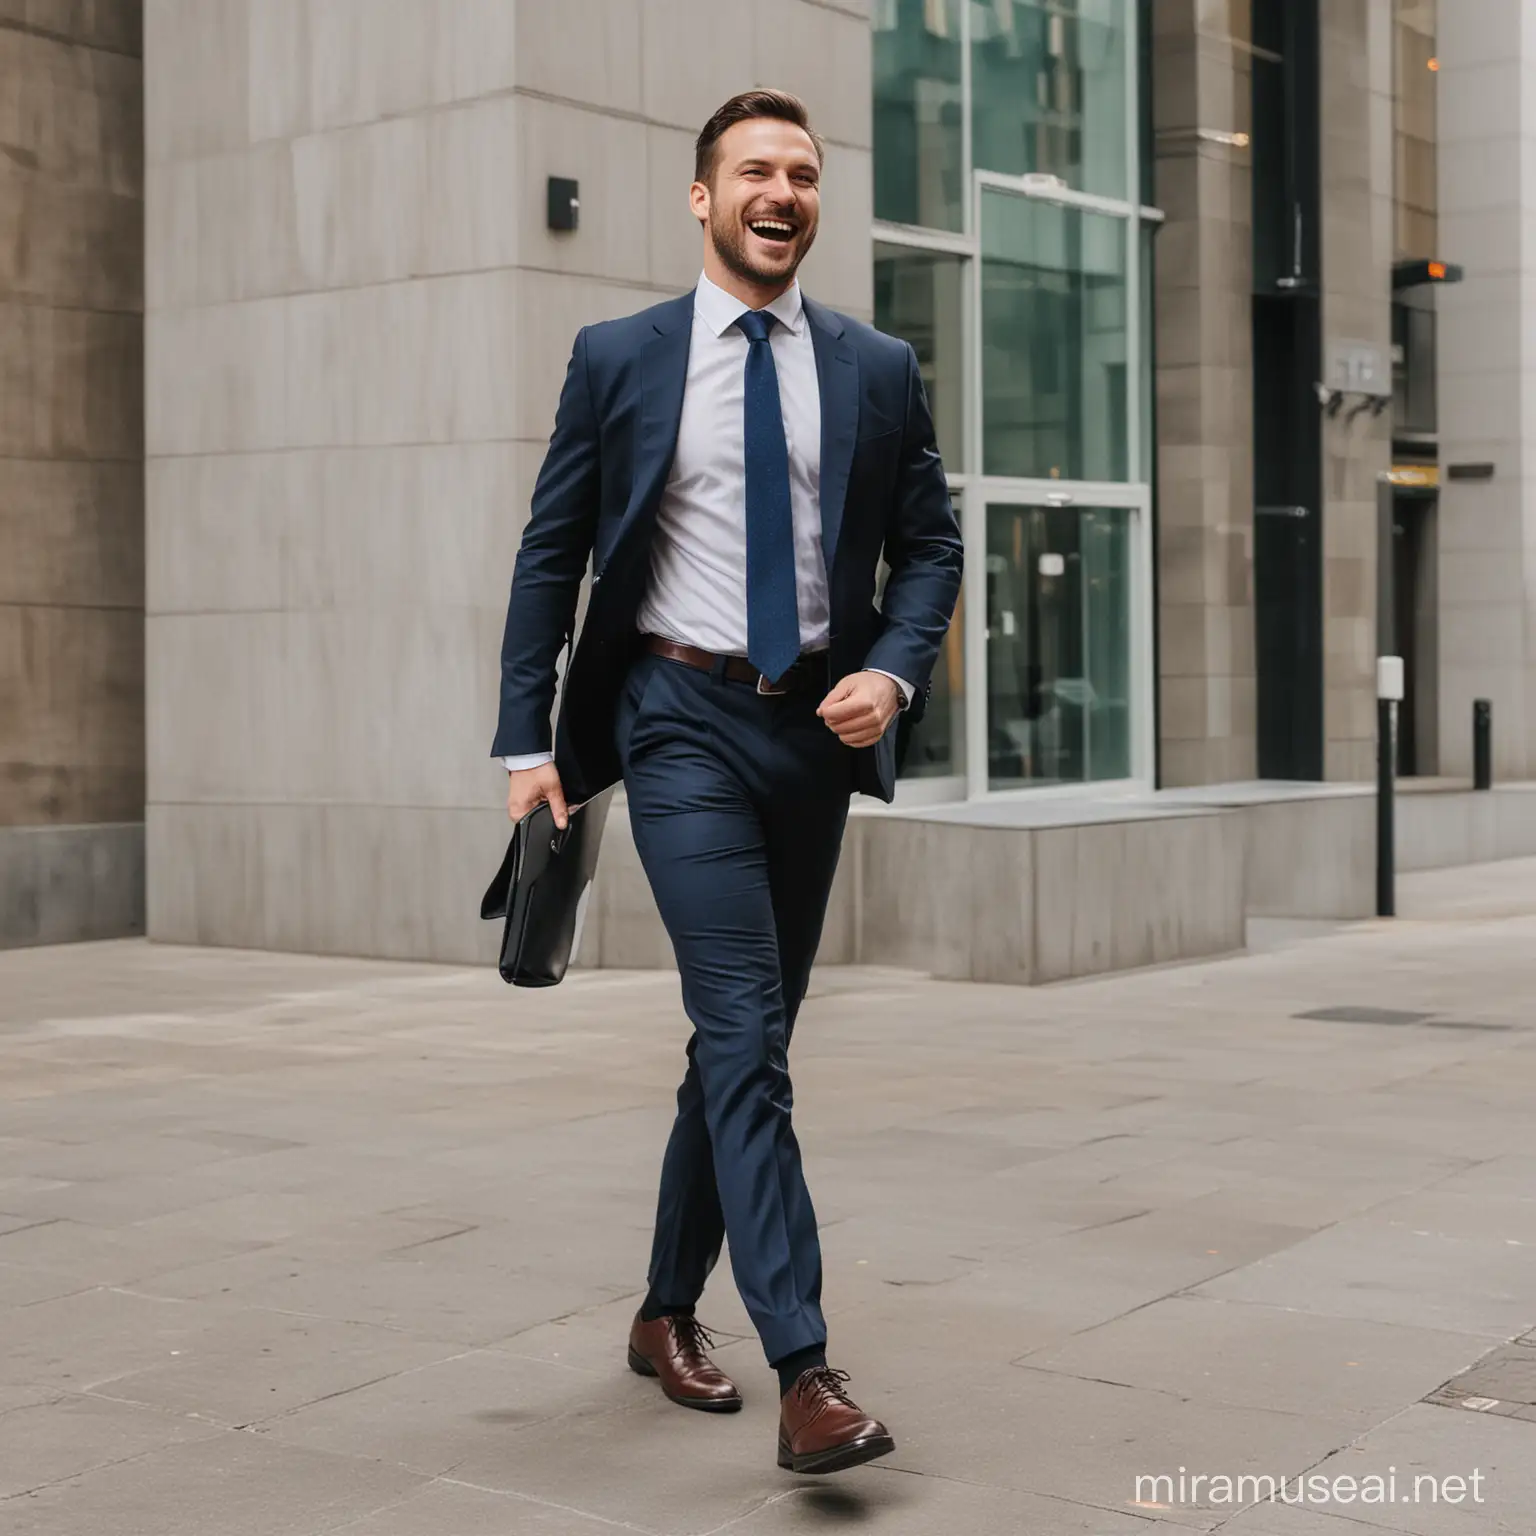 man in suit walking happily into work
